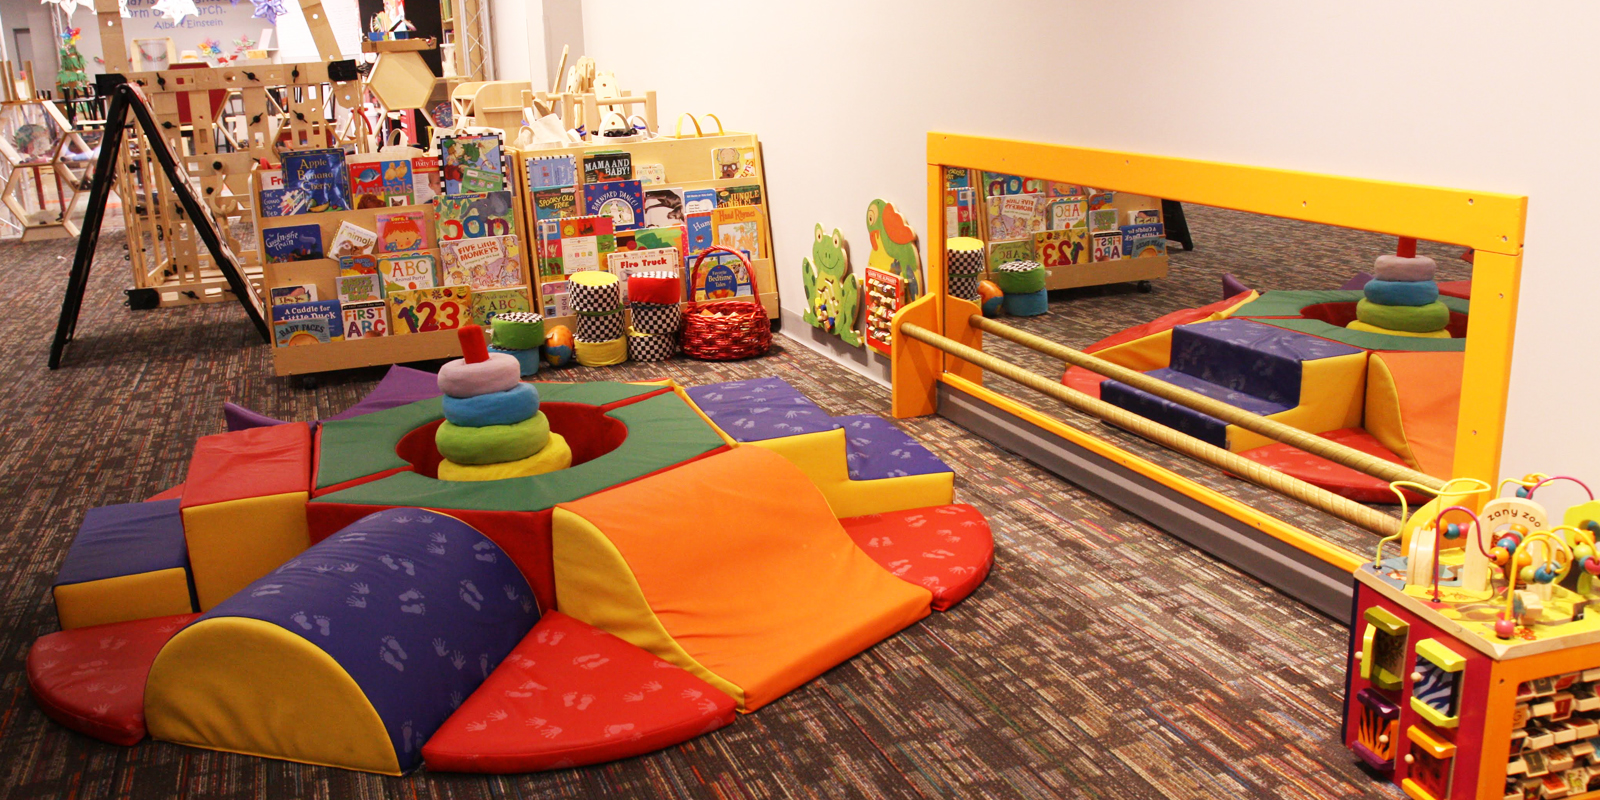 Play area with patterned carpet and bright colorful plush toys and books